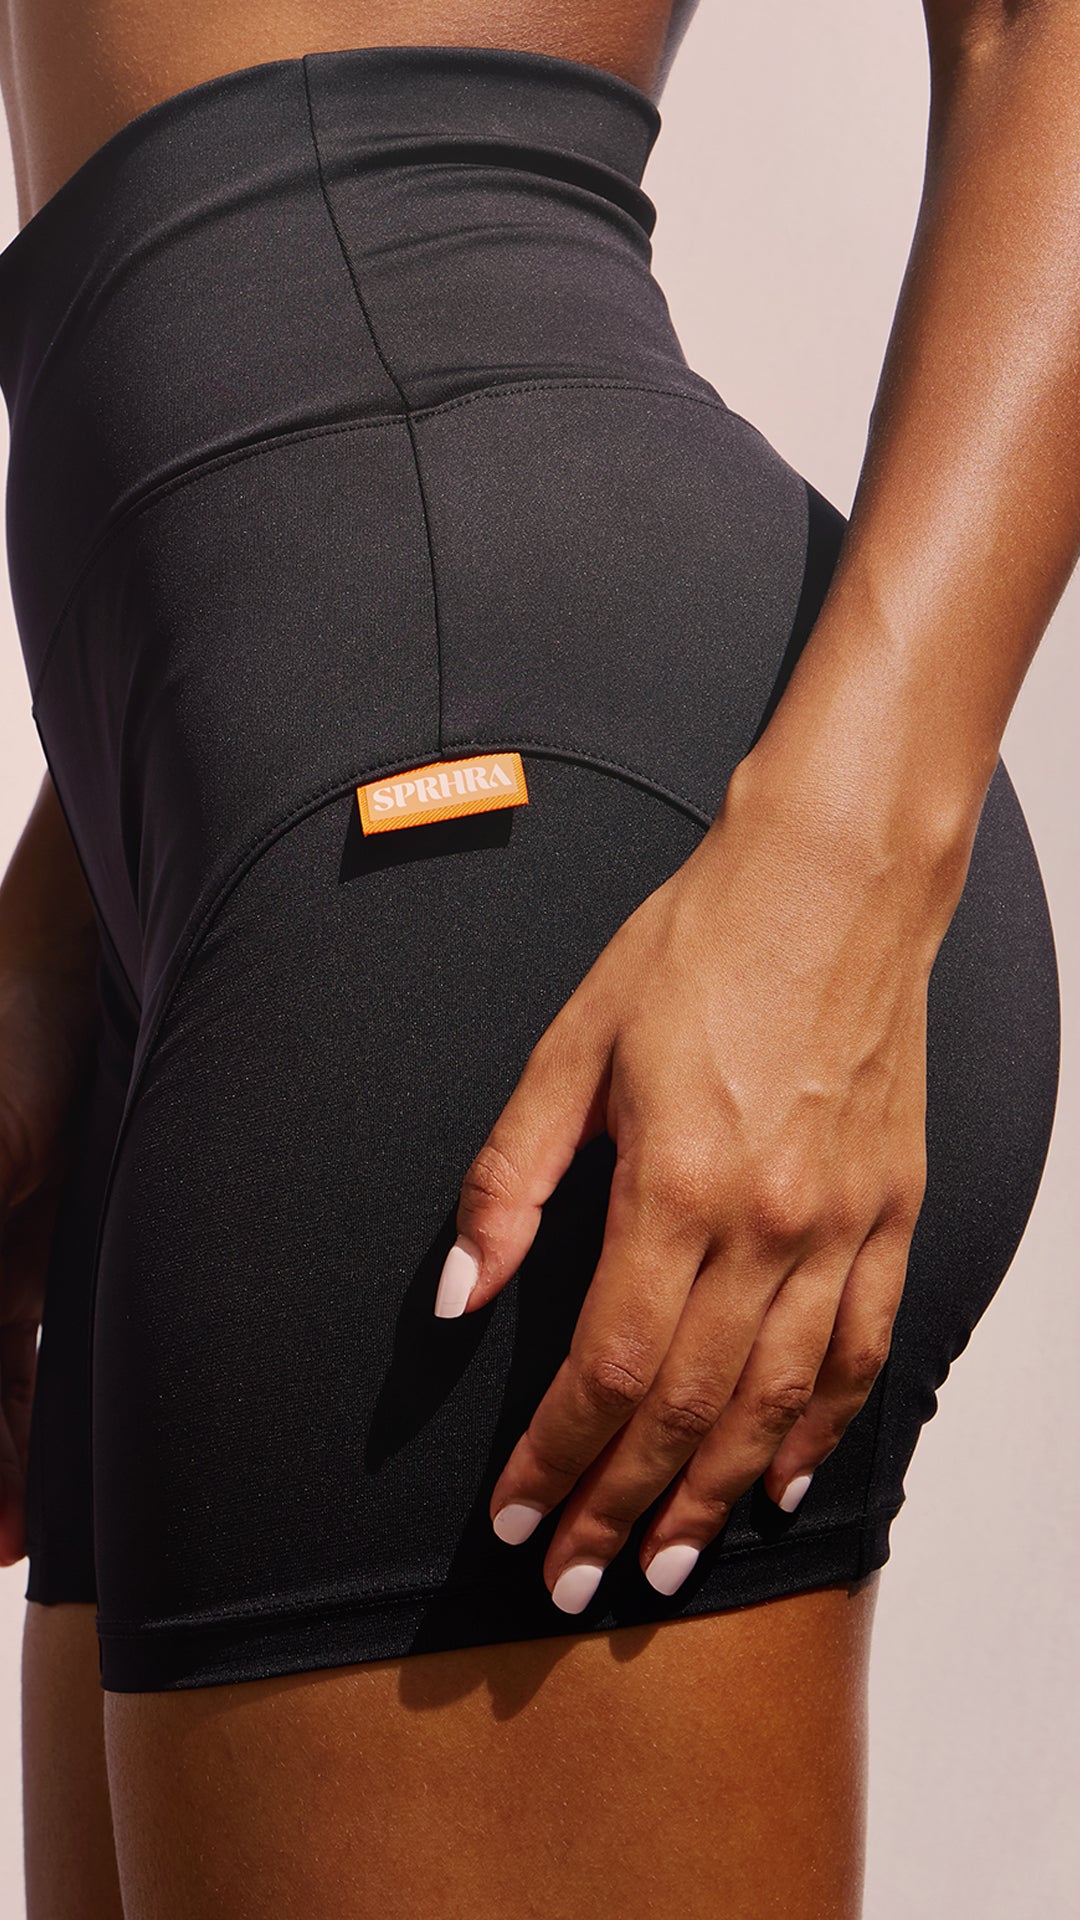 Wrap Compression Shorts - Women's Sportswear Aids in Recovery - SPRHRA